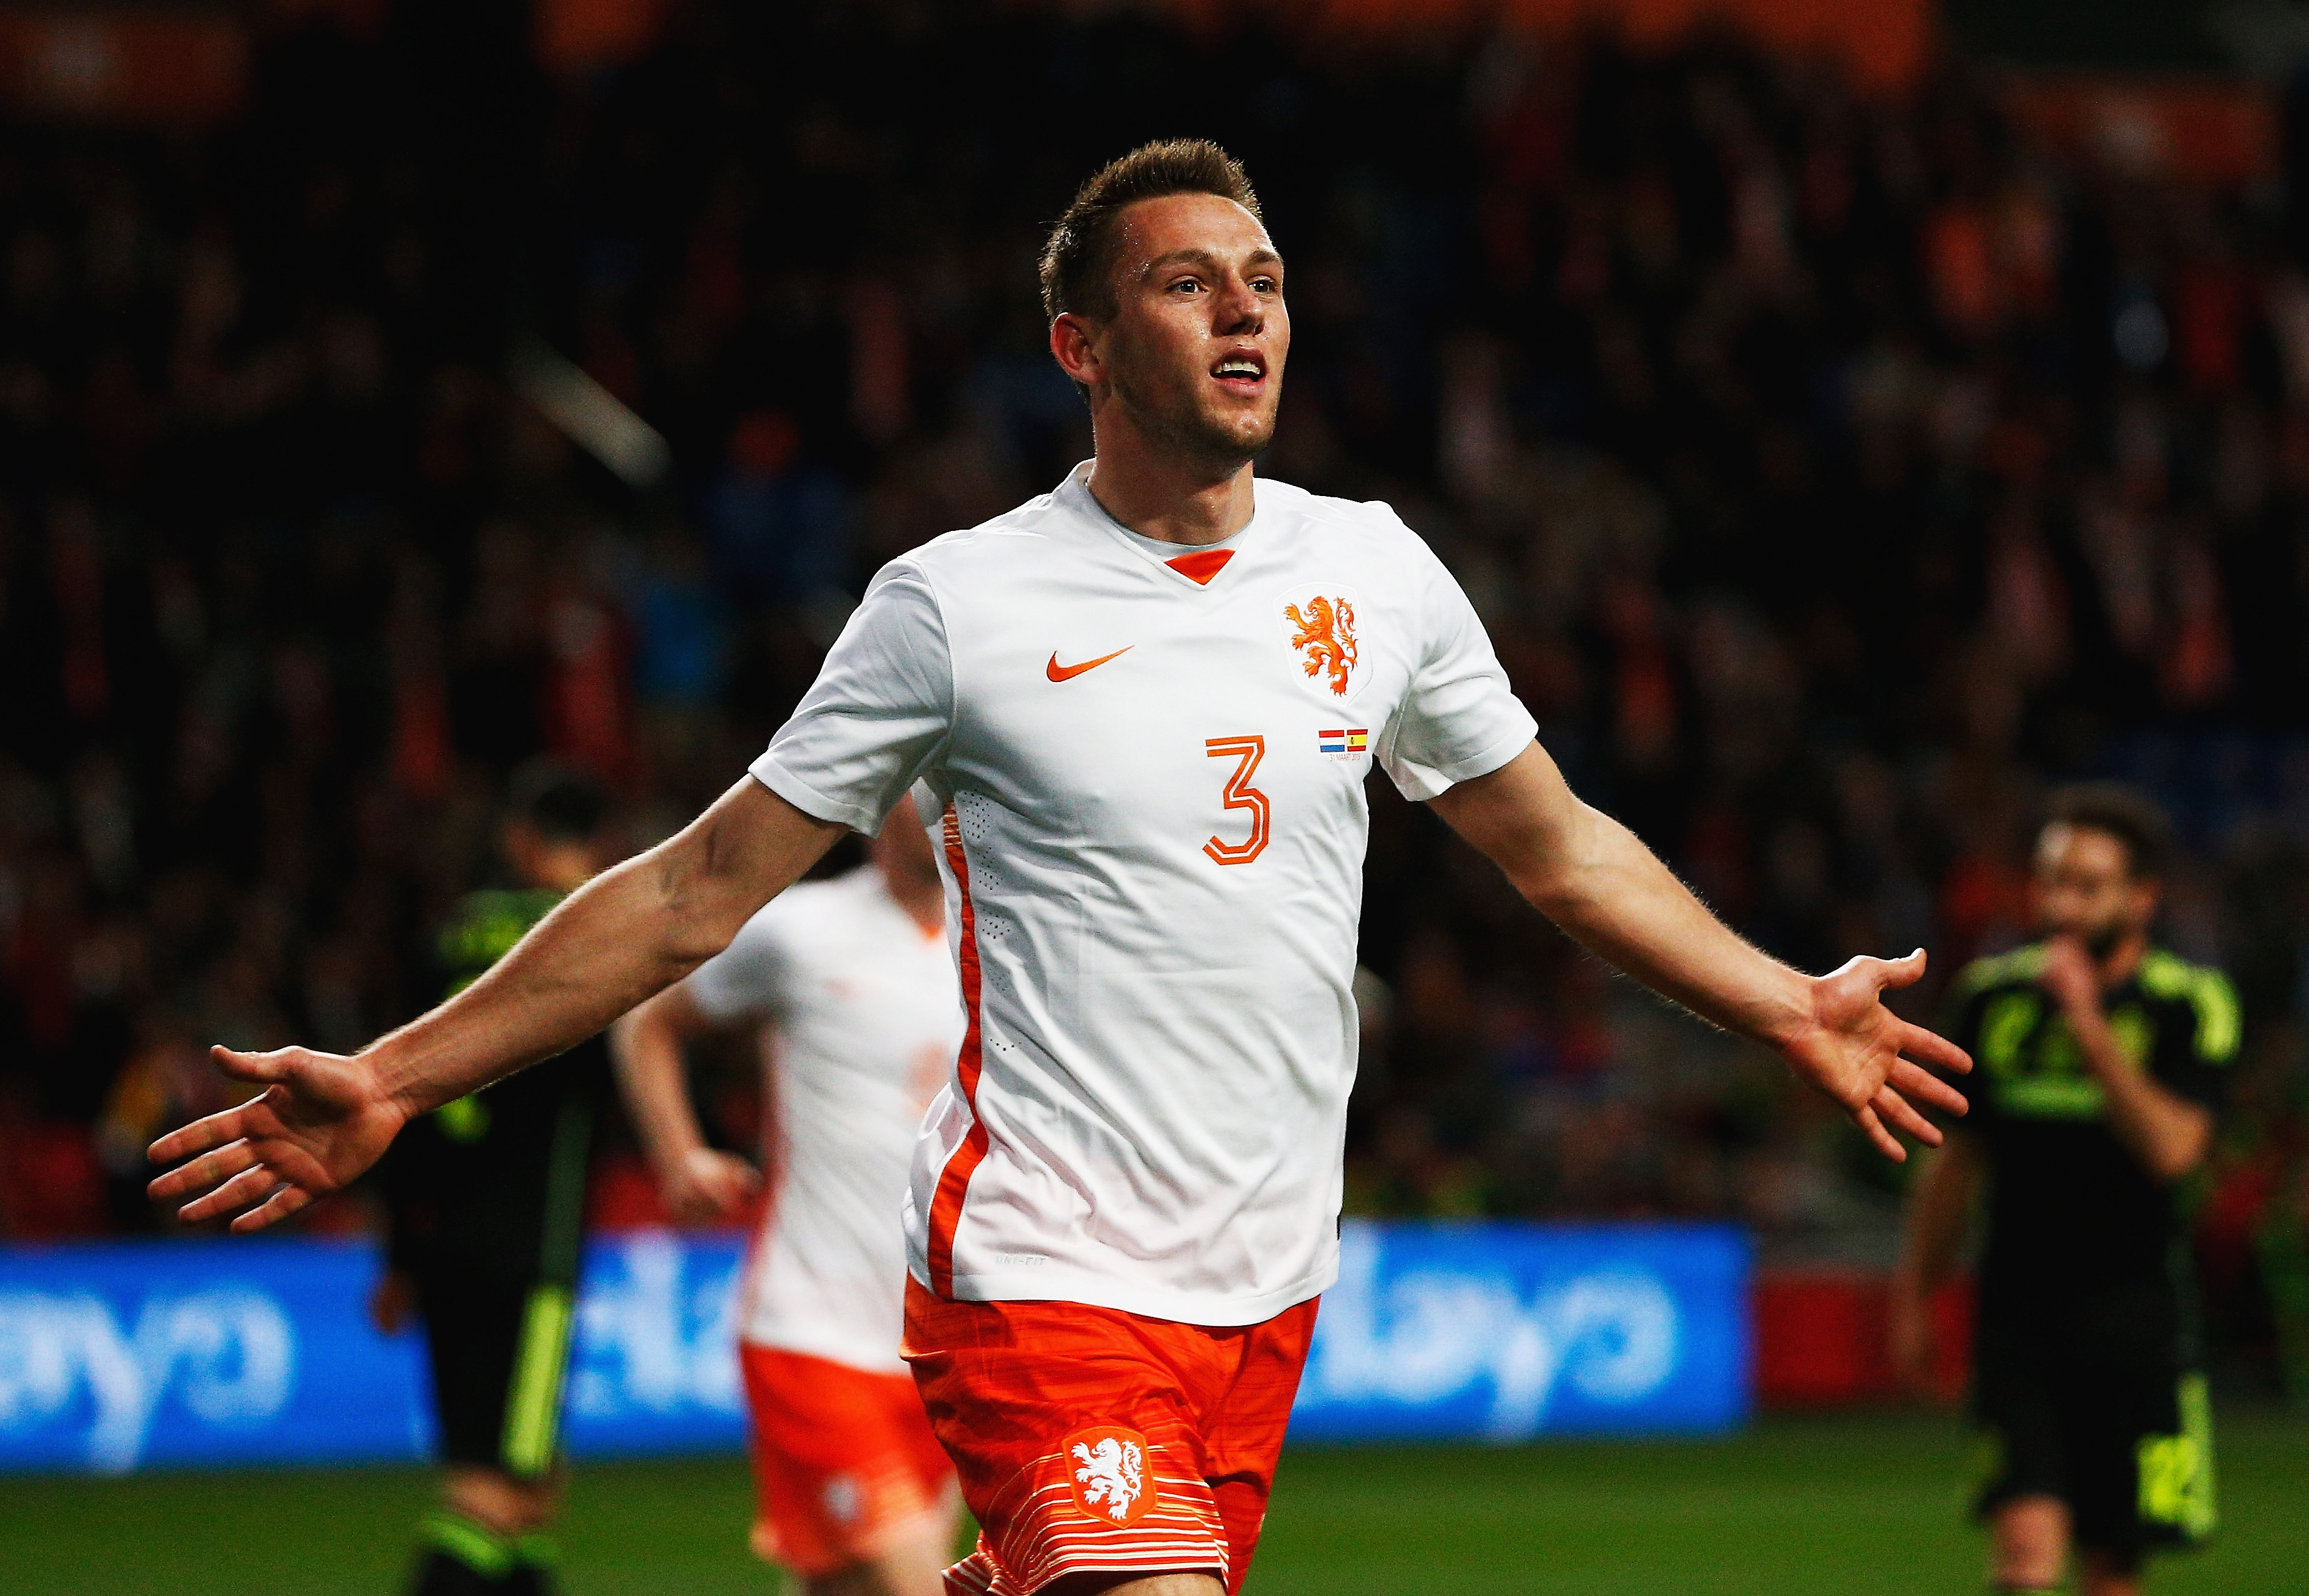 AMSTERDAM, NETHERLANDS - MARCH 31:  Stefan de Vrij of Netherlands celebrates scoring the opening goal during the international friendly match between the Netherlands and Spain held at Amsterdam Arena on March 31, 2015 in Amsterdam, Netherlands.  (Photo by Dean Mouhtaropoulos/Getty Images)